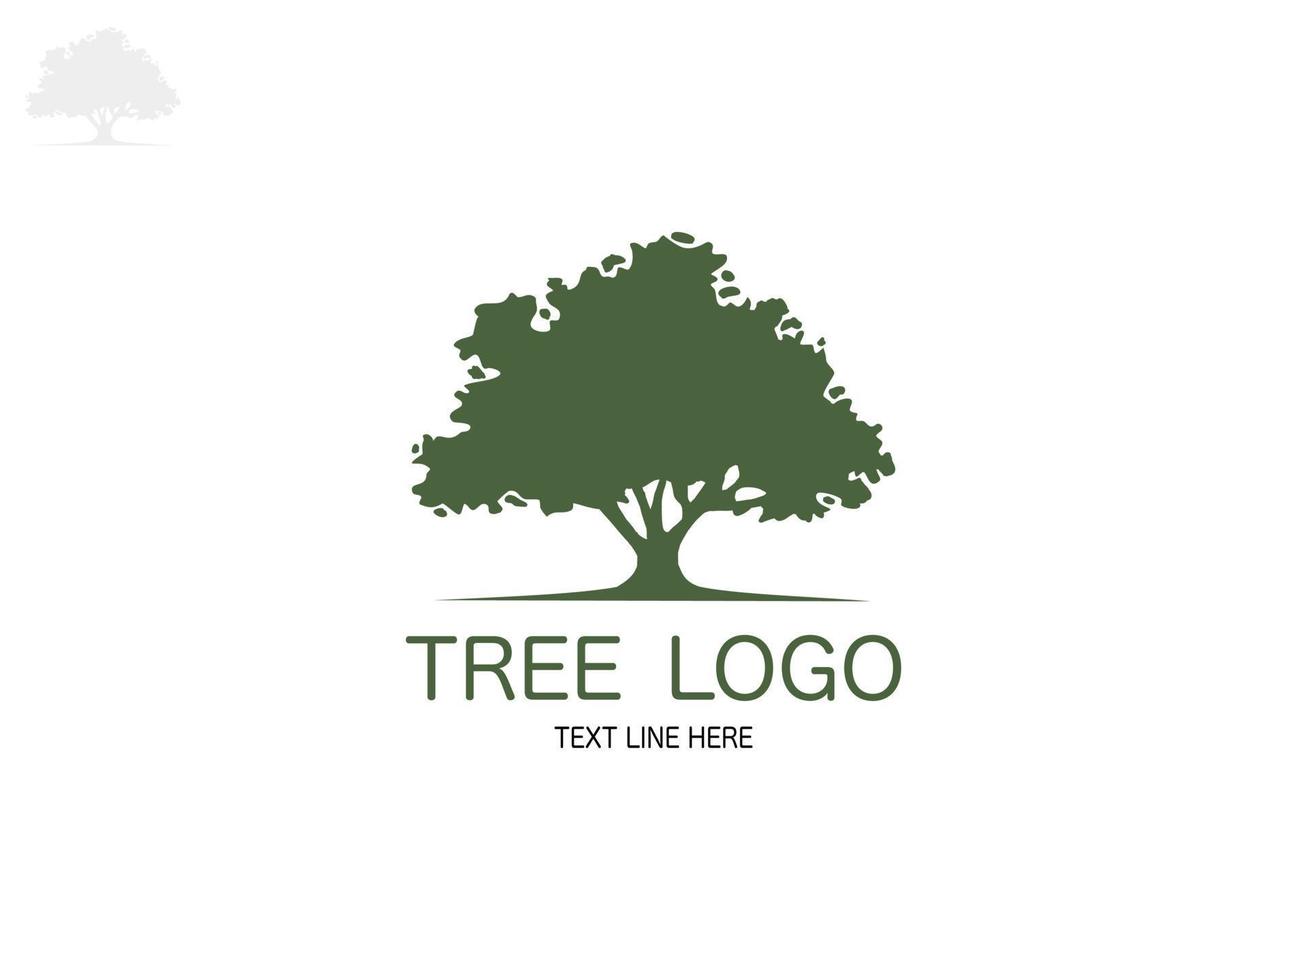 Trees and root with leaves look beautiful and refreshing. Tree and roots LOGO style. vector